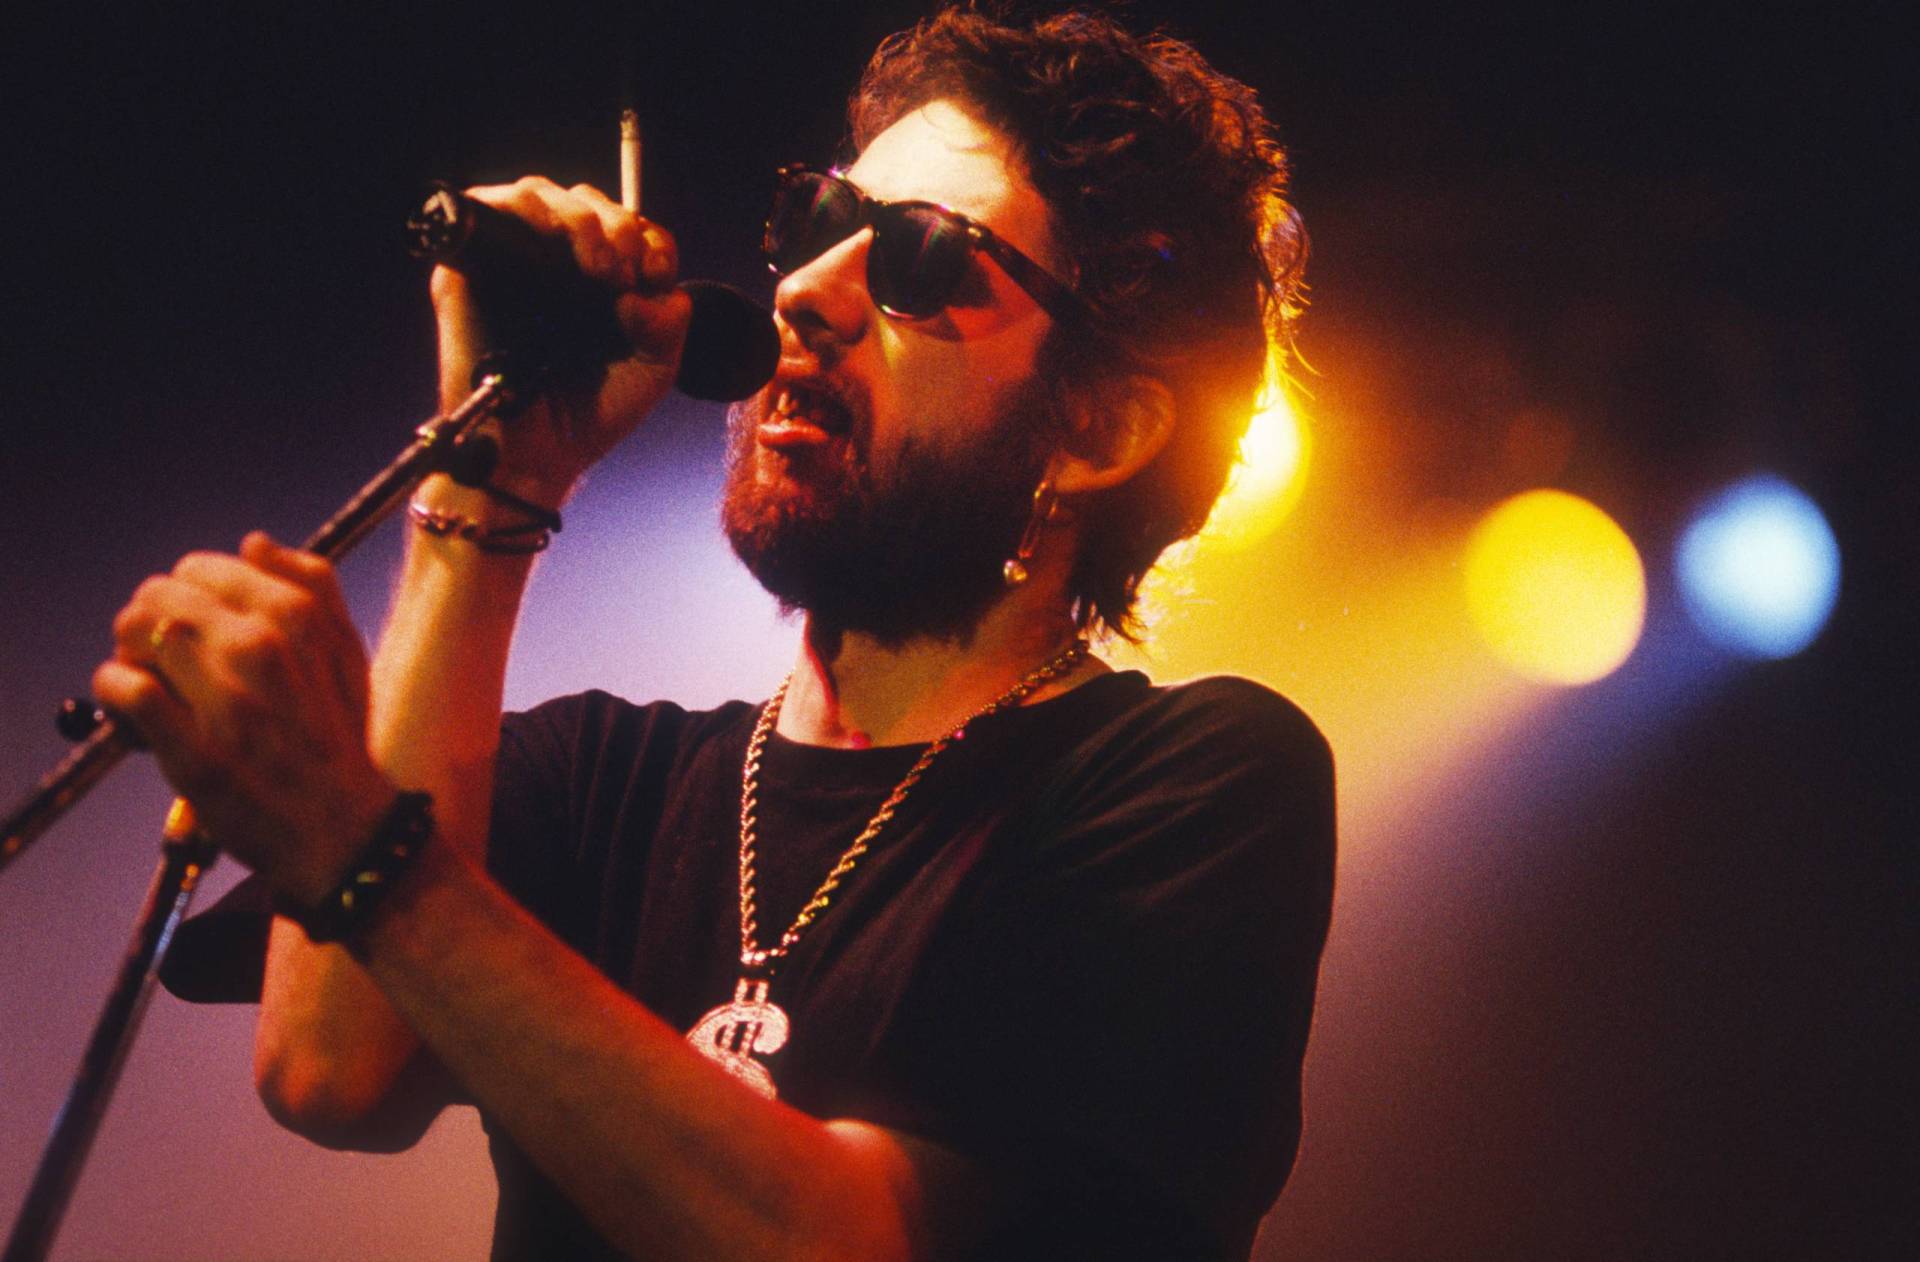 A thin white man with a beard, wearing sunglasses clutches a microphone on a stand, as he sings into it. He is backlit by stage lights.